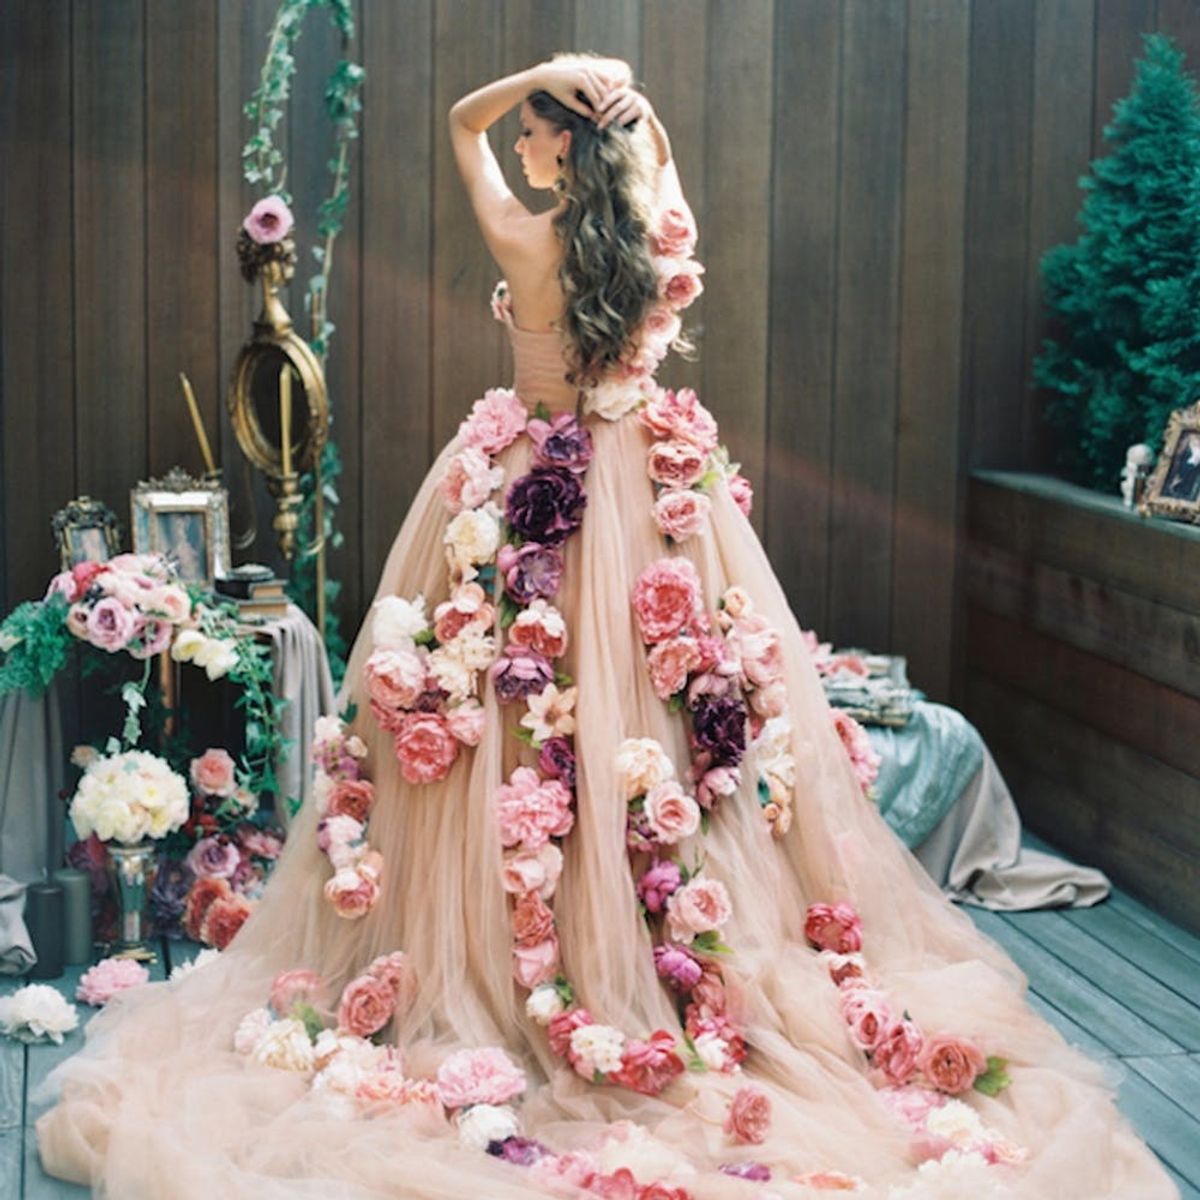 11 Non-Flower Crown Ways to Wear Flowers on Your Wedding Day